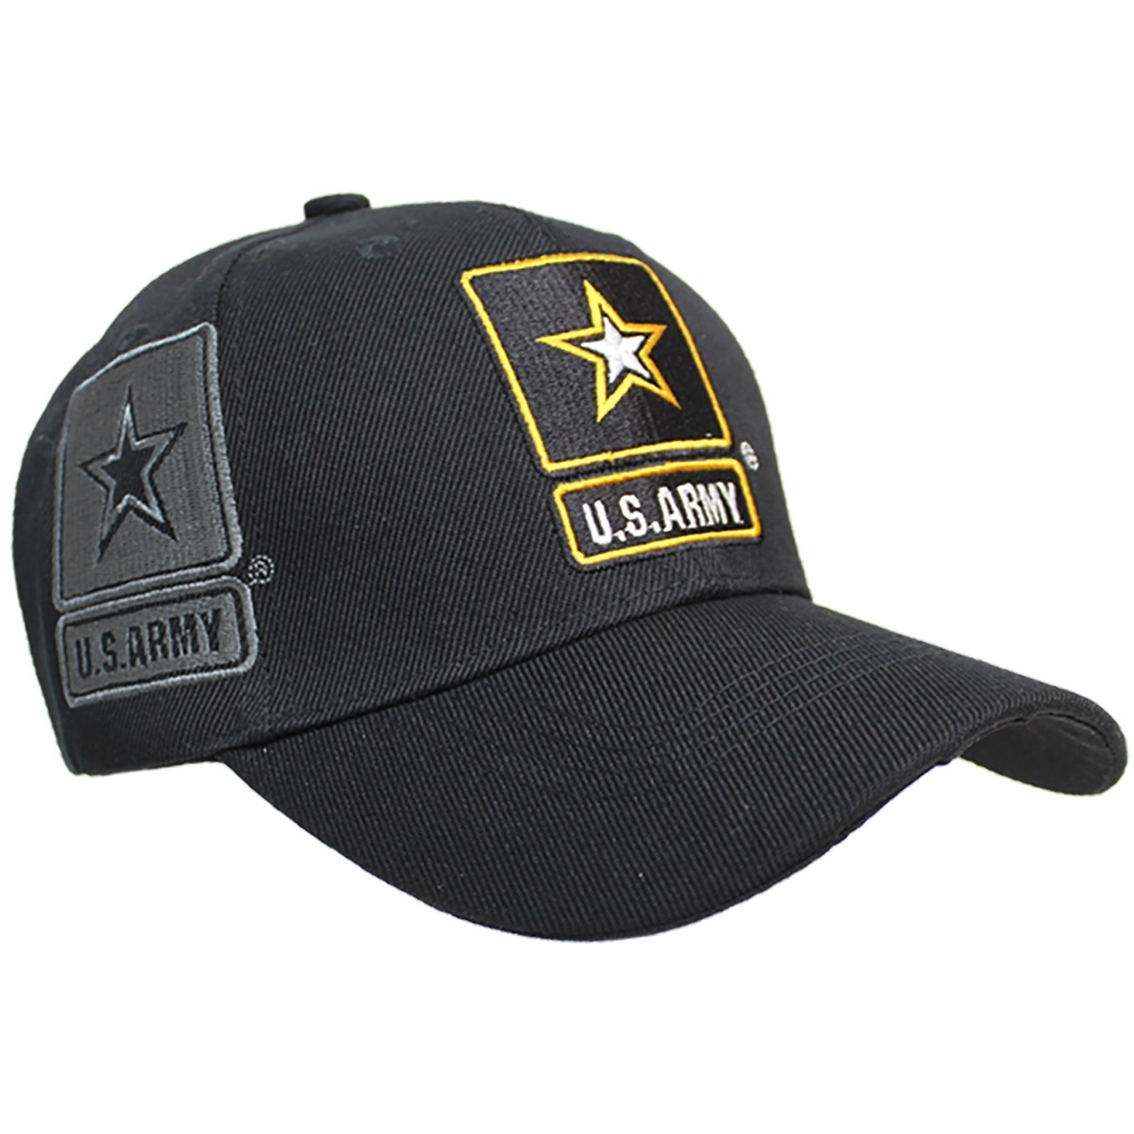 US Army Black Shadow Embroidery Cap - Image 2 of 2